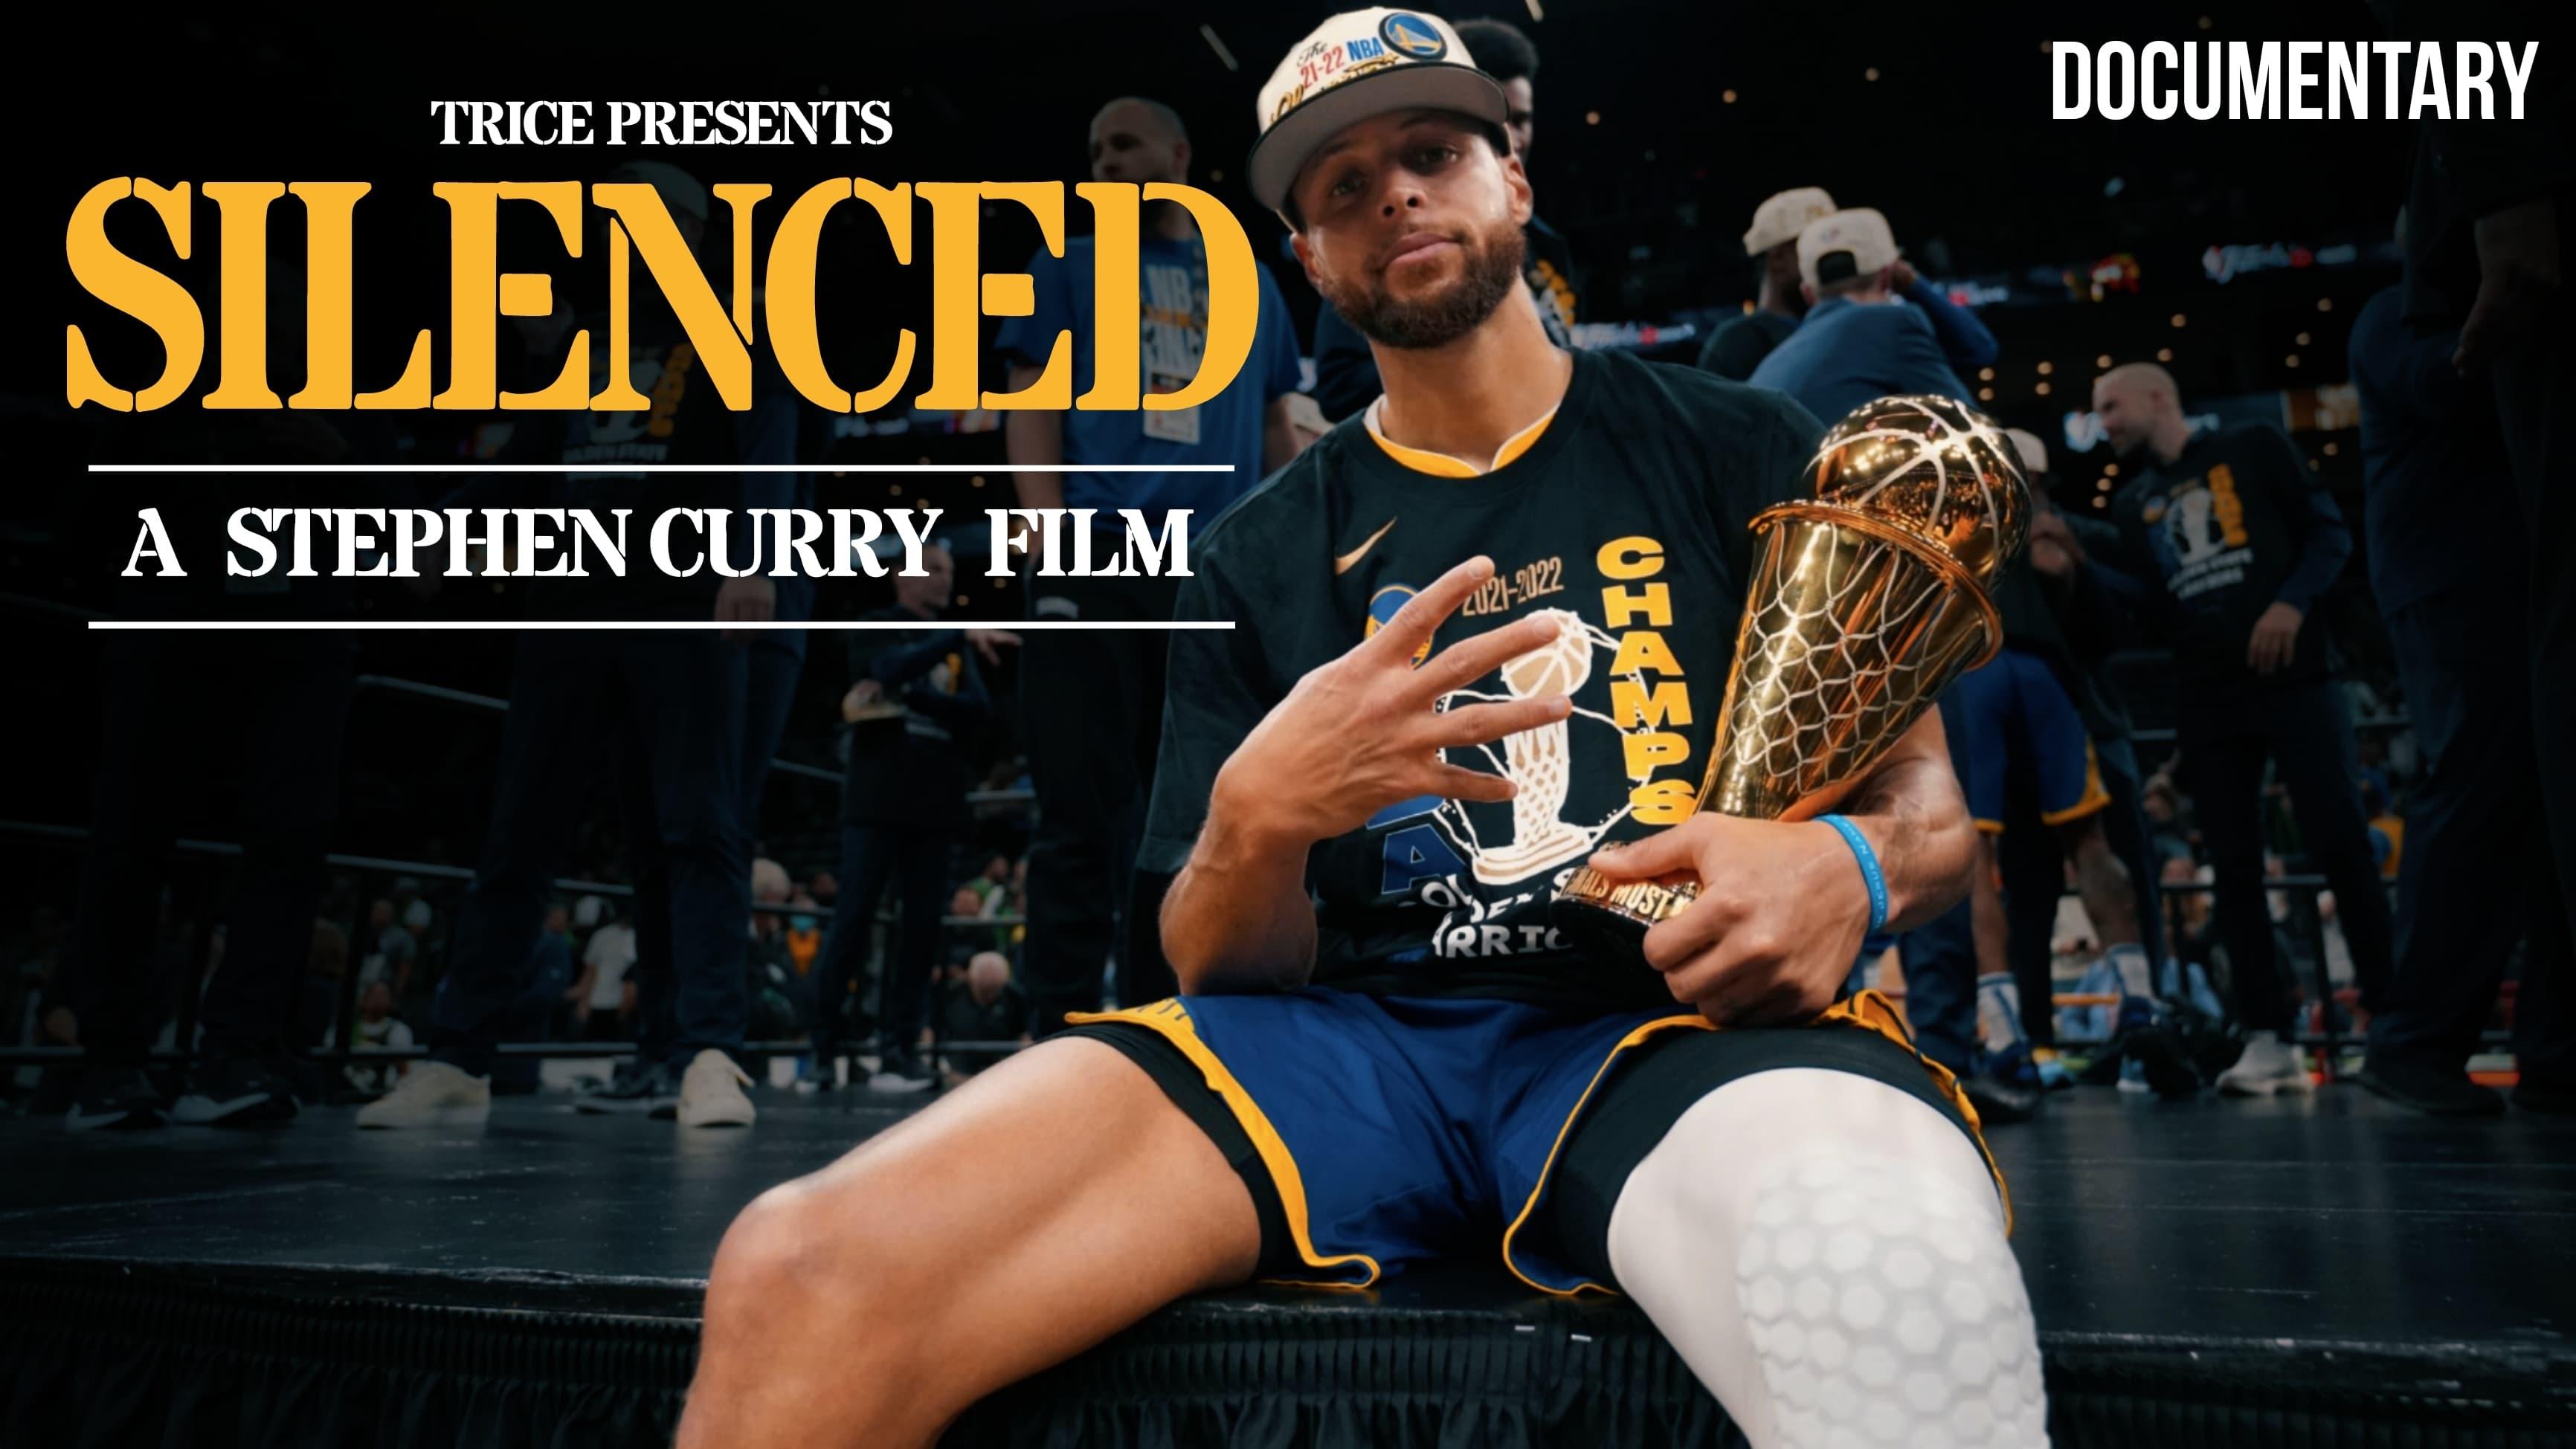 Silenced: A Stephen Curry Film backdrop